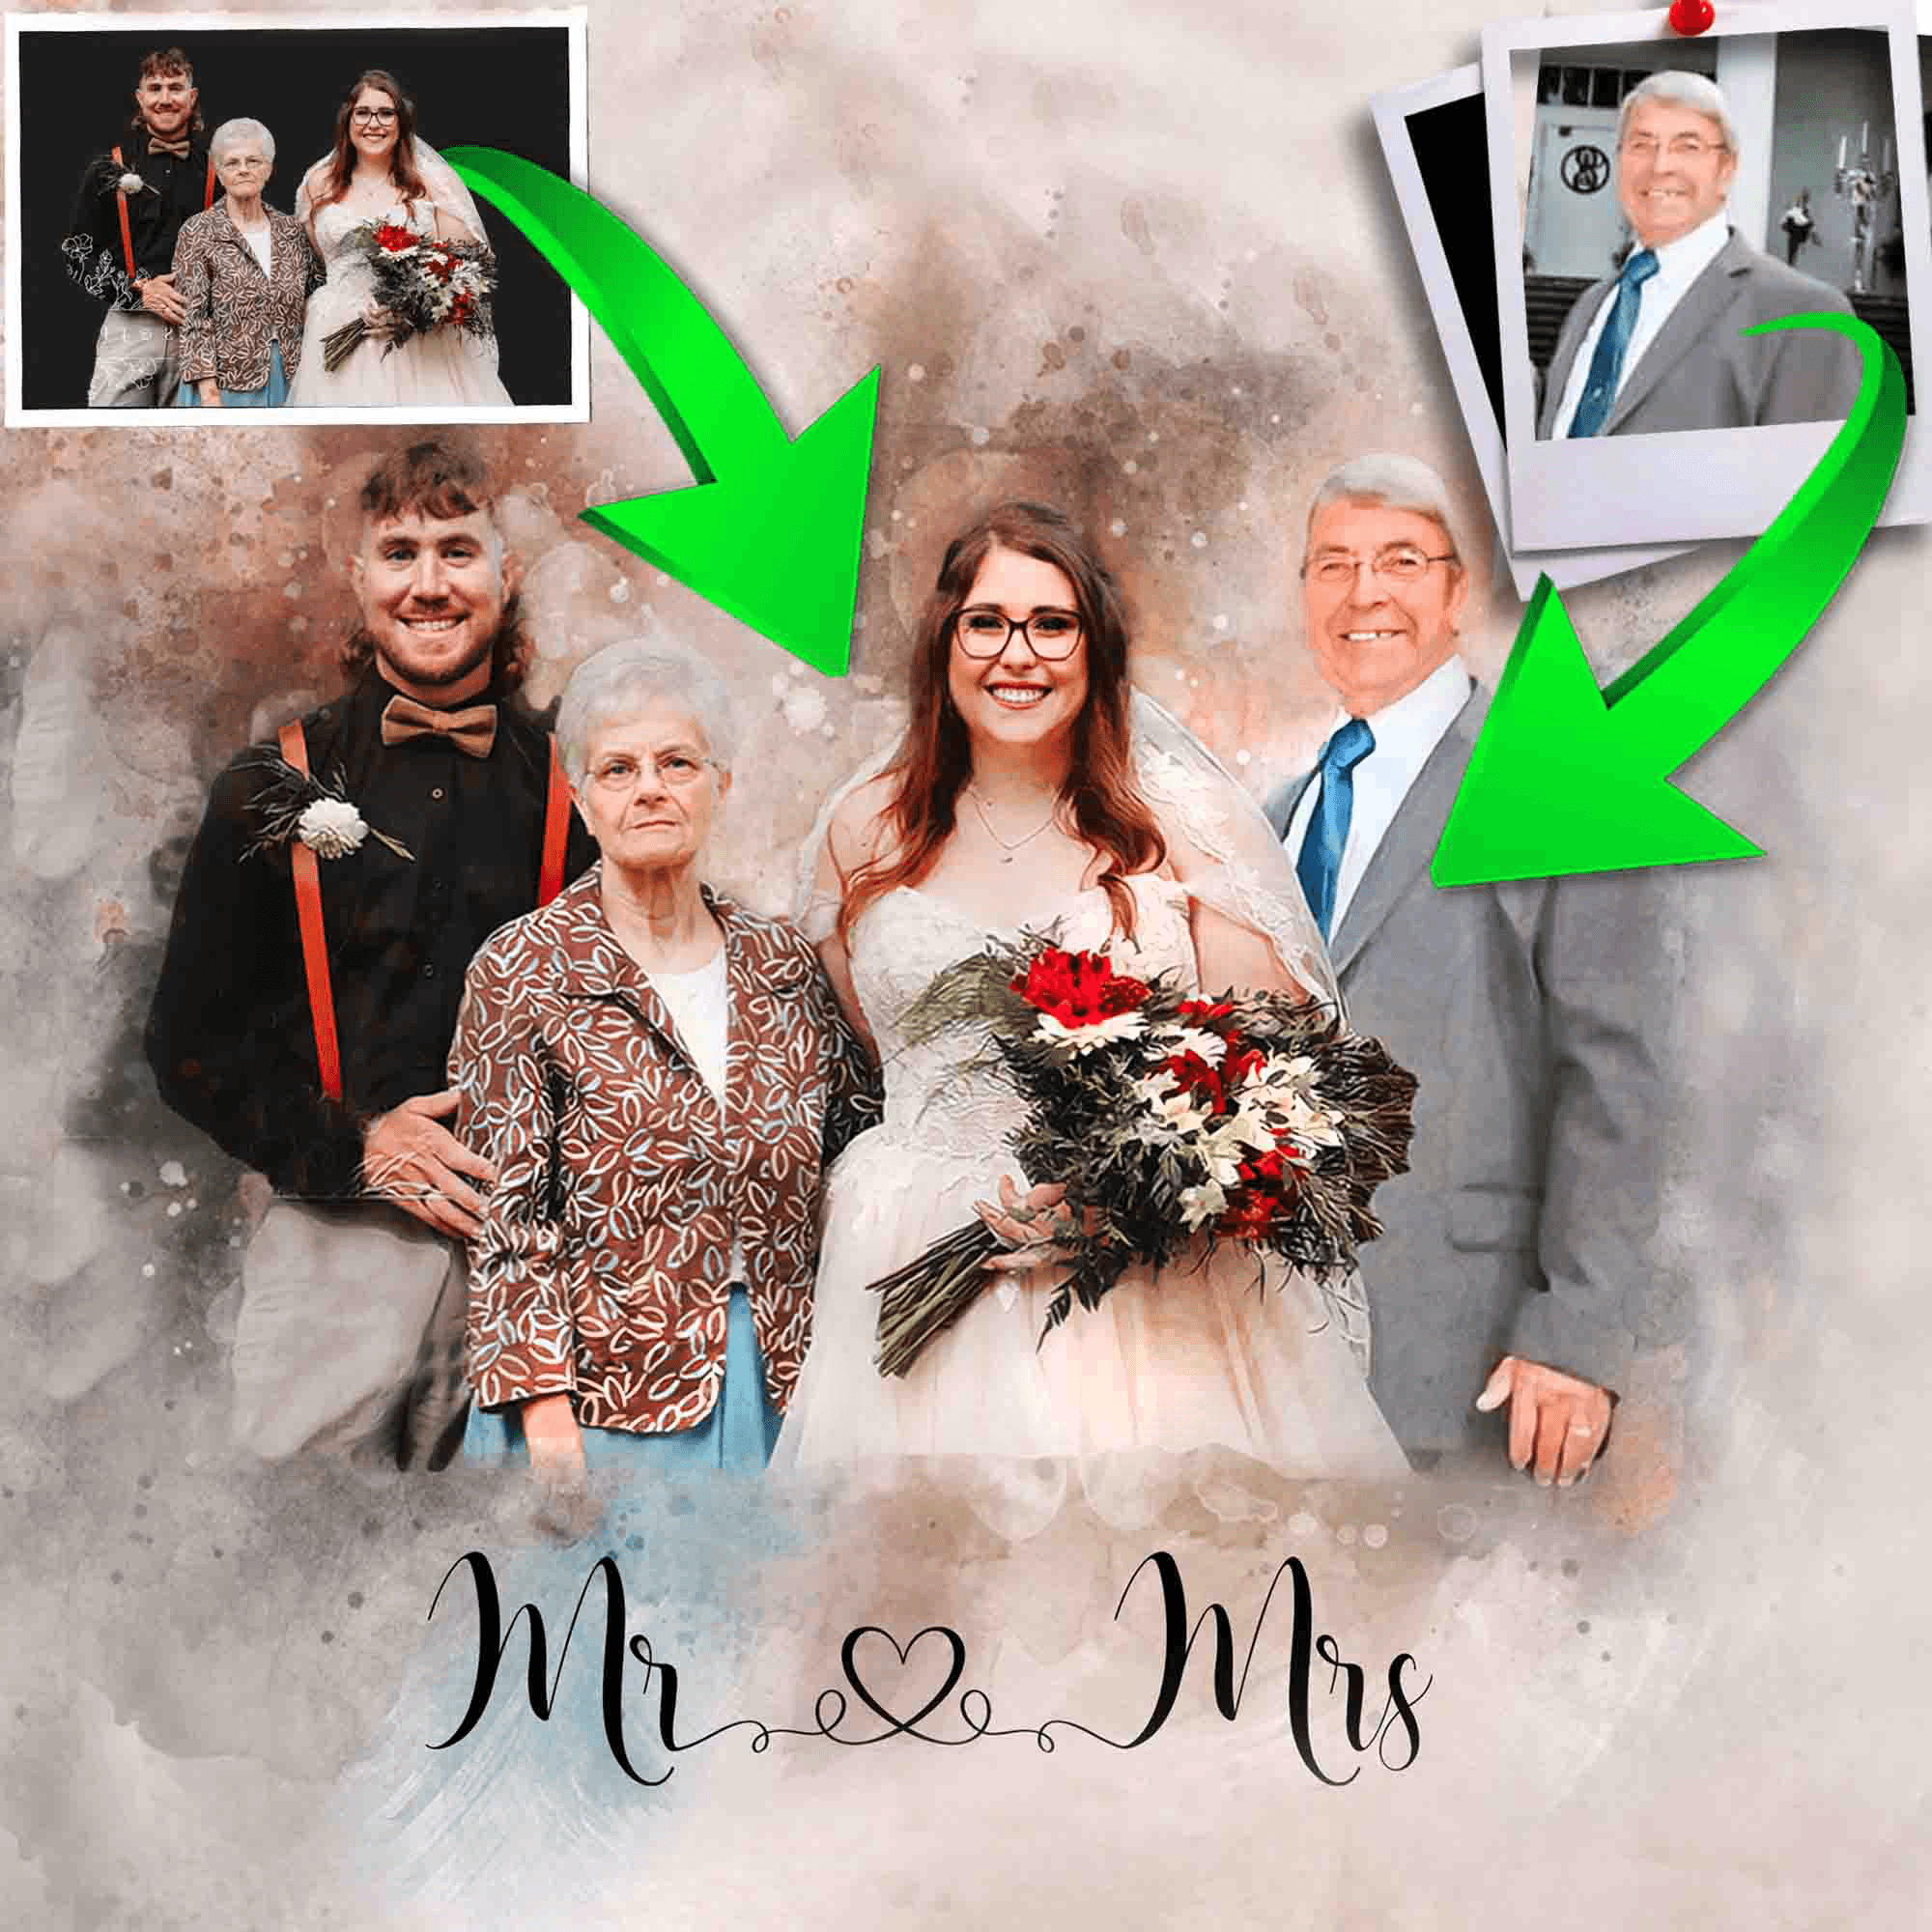 🌈 Family Photo with Deceased | Add People to Photo | Add Loved one in a Picture |Custom Family Portrait💙 - FromPicToArt